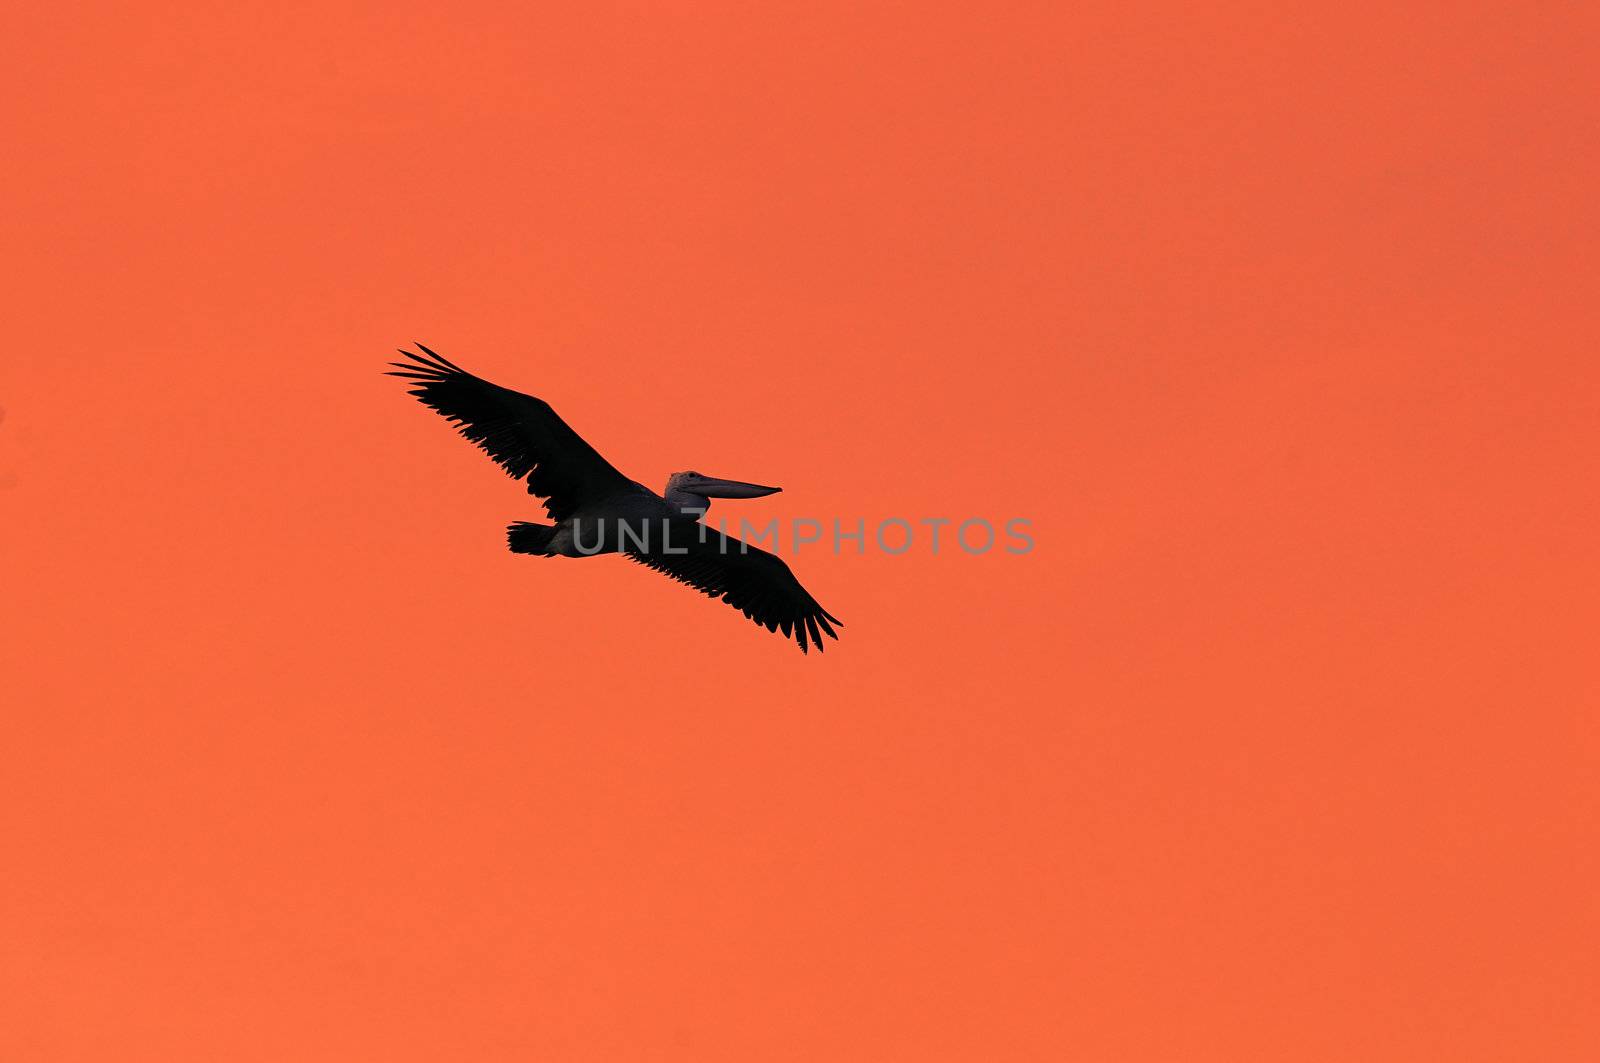 A large Pelican flying against the morning sun